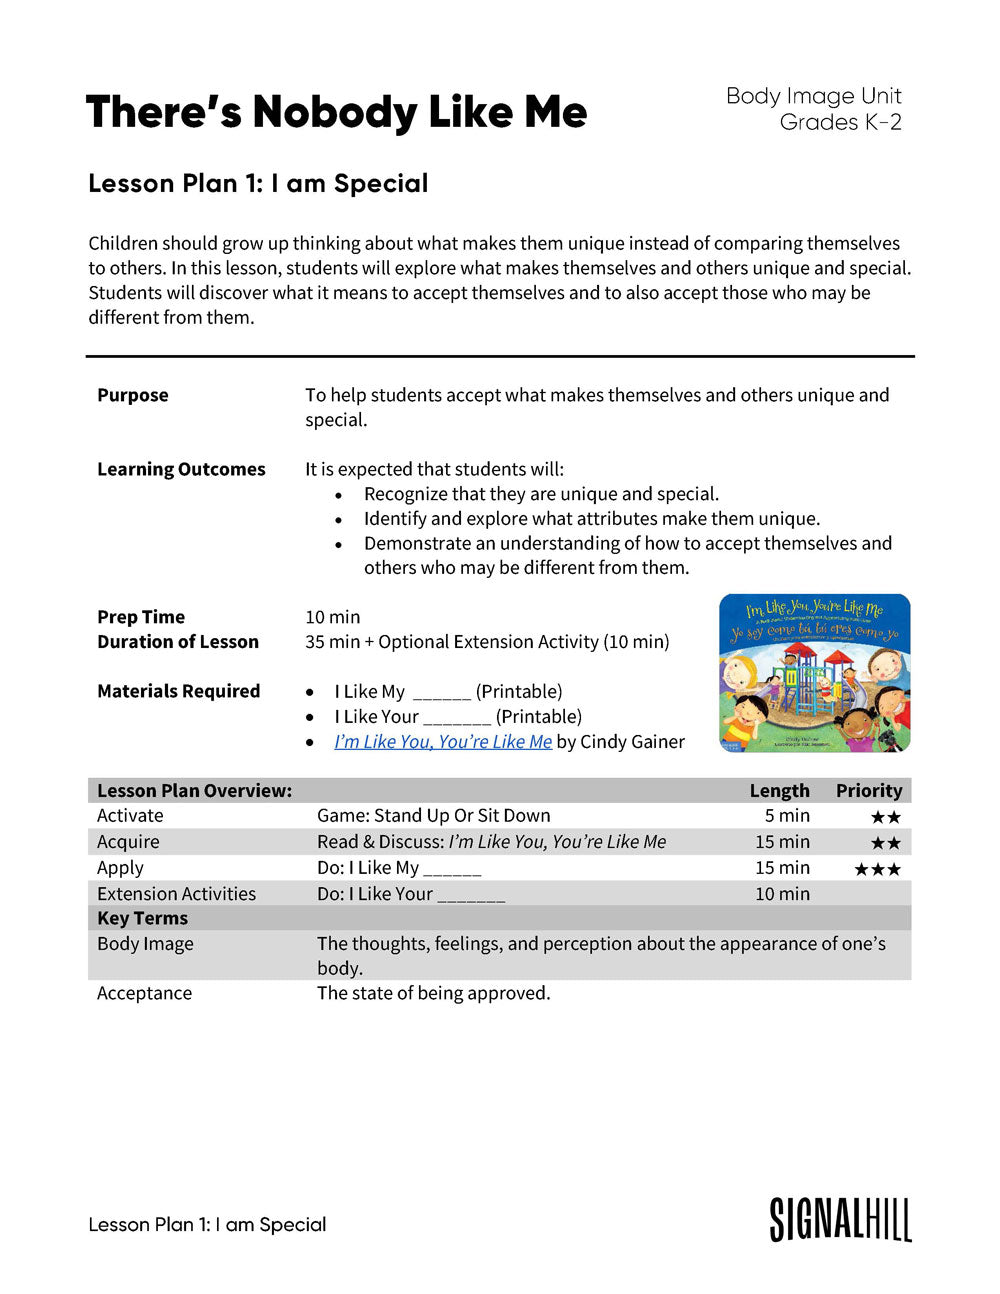 Lesson Plan 1: I am Special